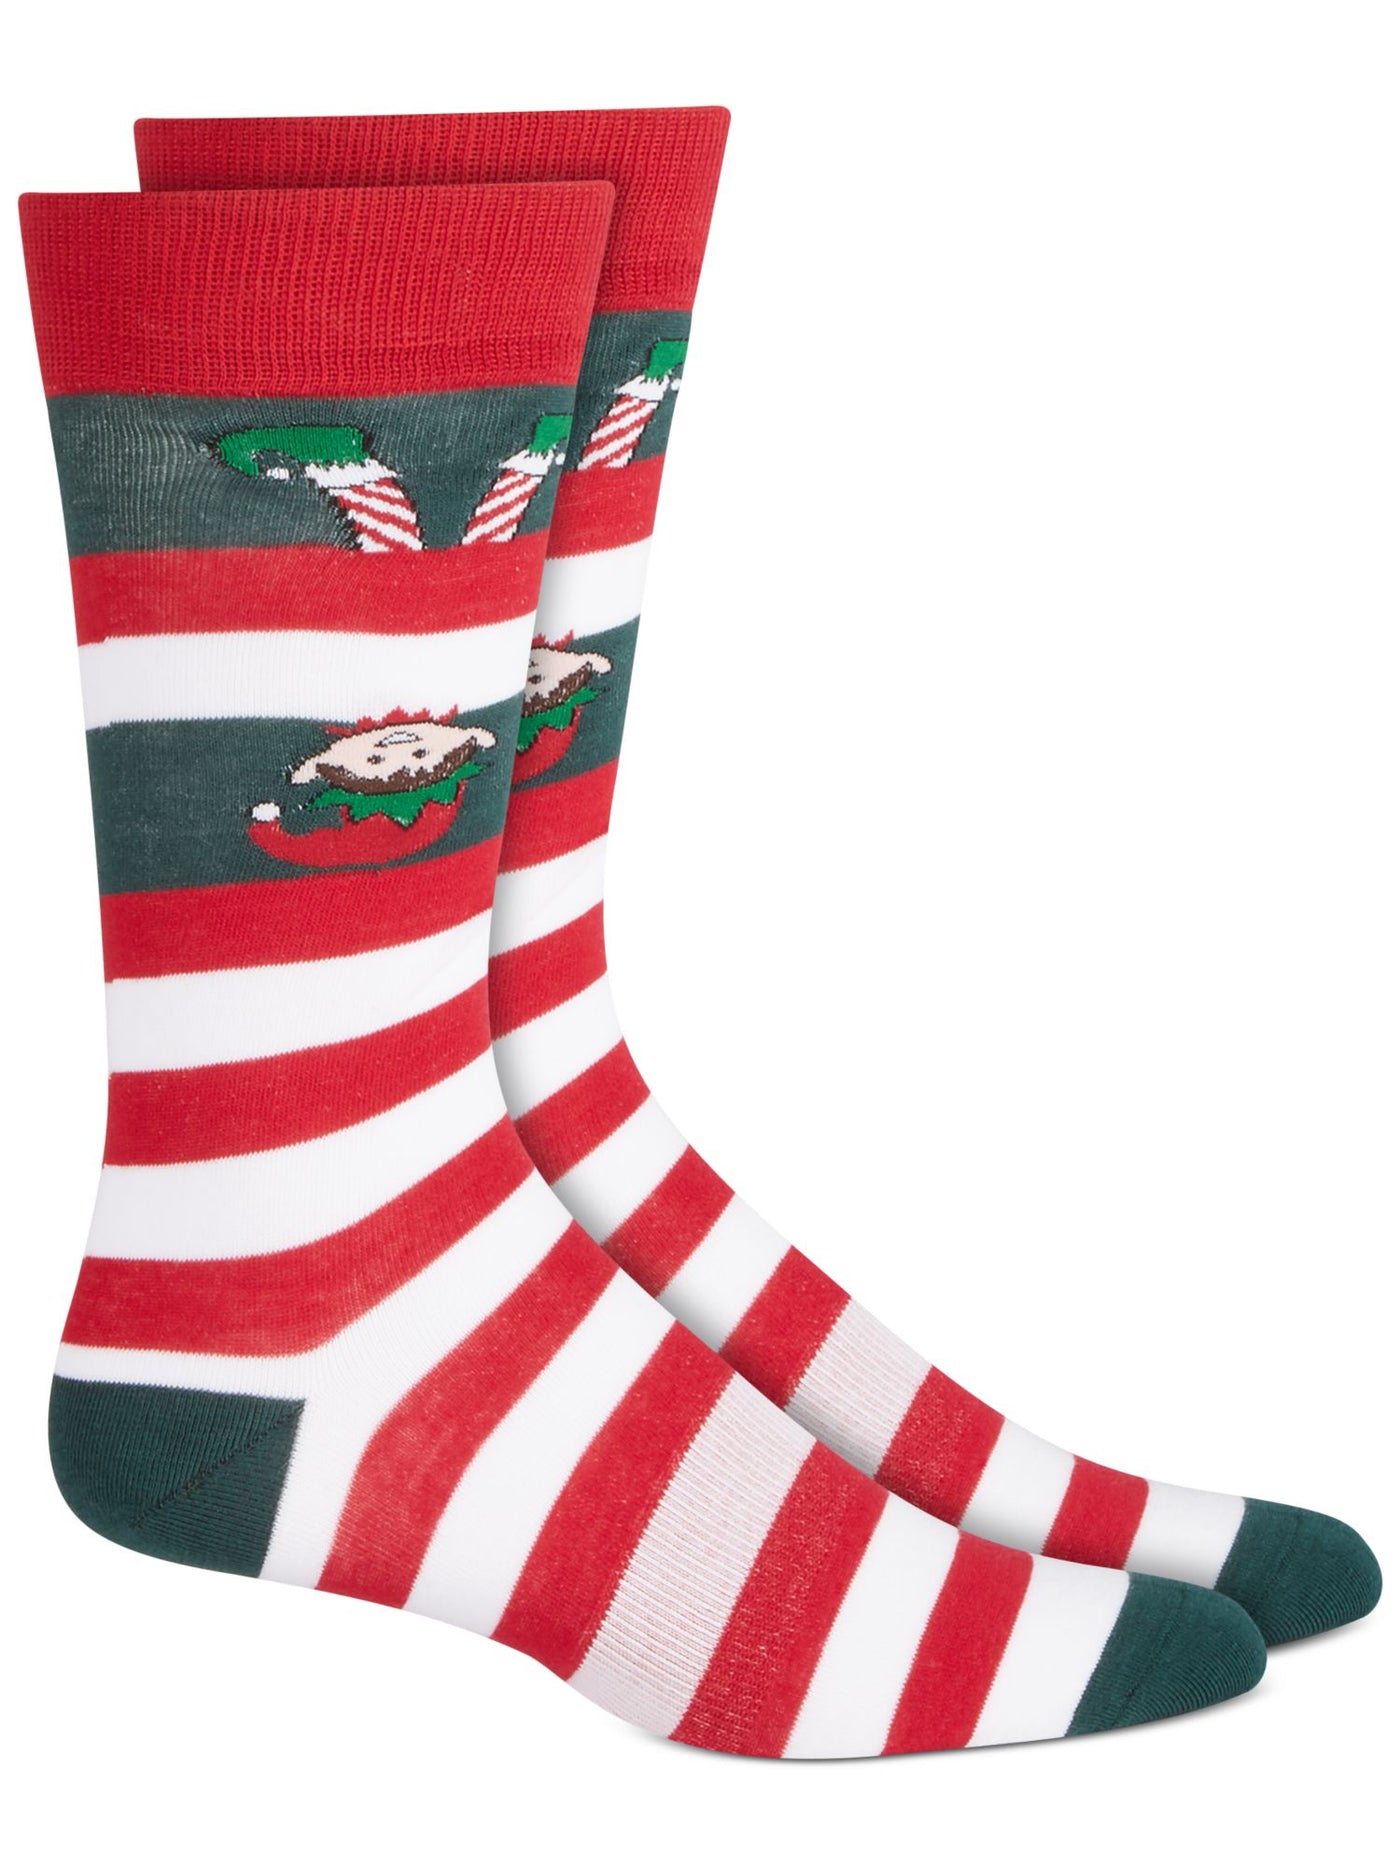 BAR III Mens Red Striped Graphic Arch Support Seamless Novelty Over The Calf Socks 7-12